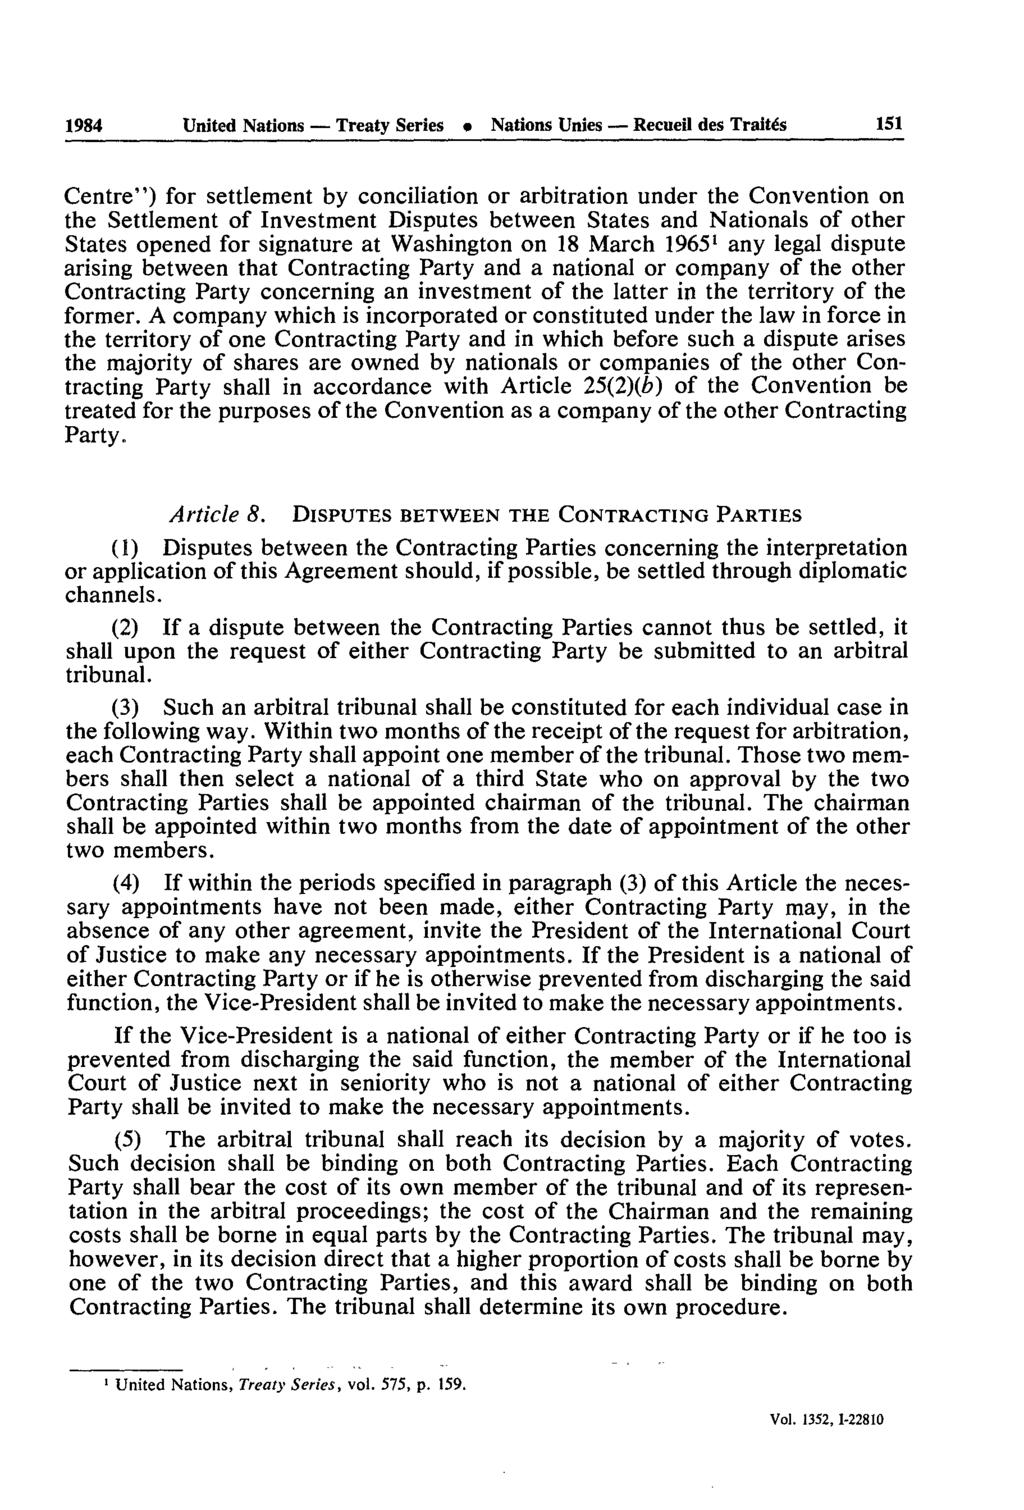 1984 United Nations Treaty Series Nations Unies Recueil des Traités 151 Centre") for settlement by conciliation or arbitration under the Convention on the Settlement of Investment Disputes between